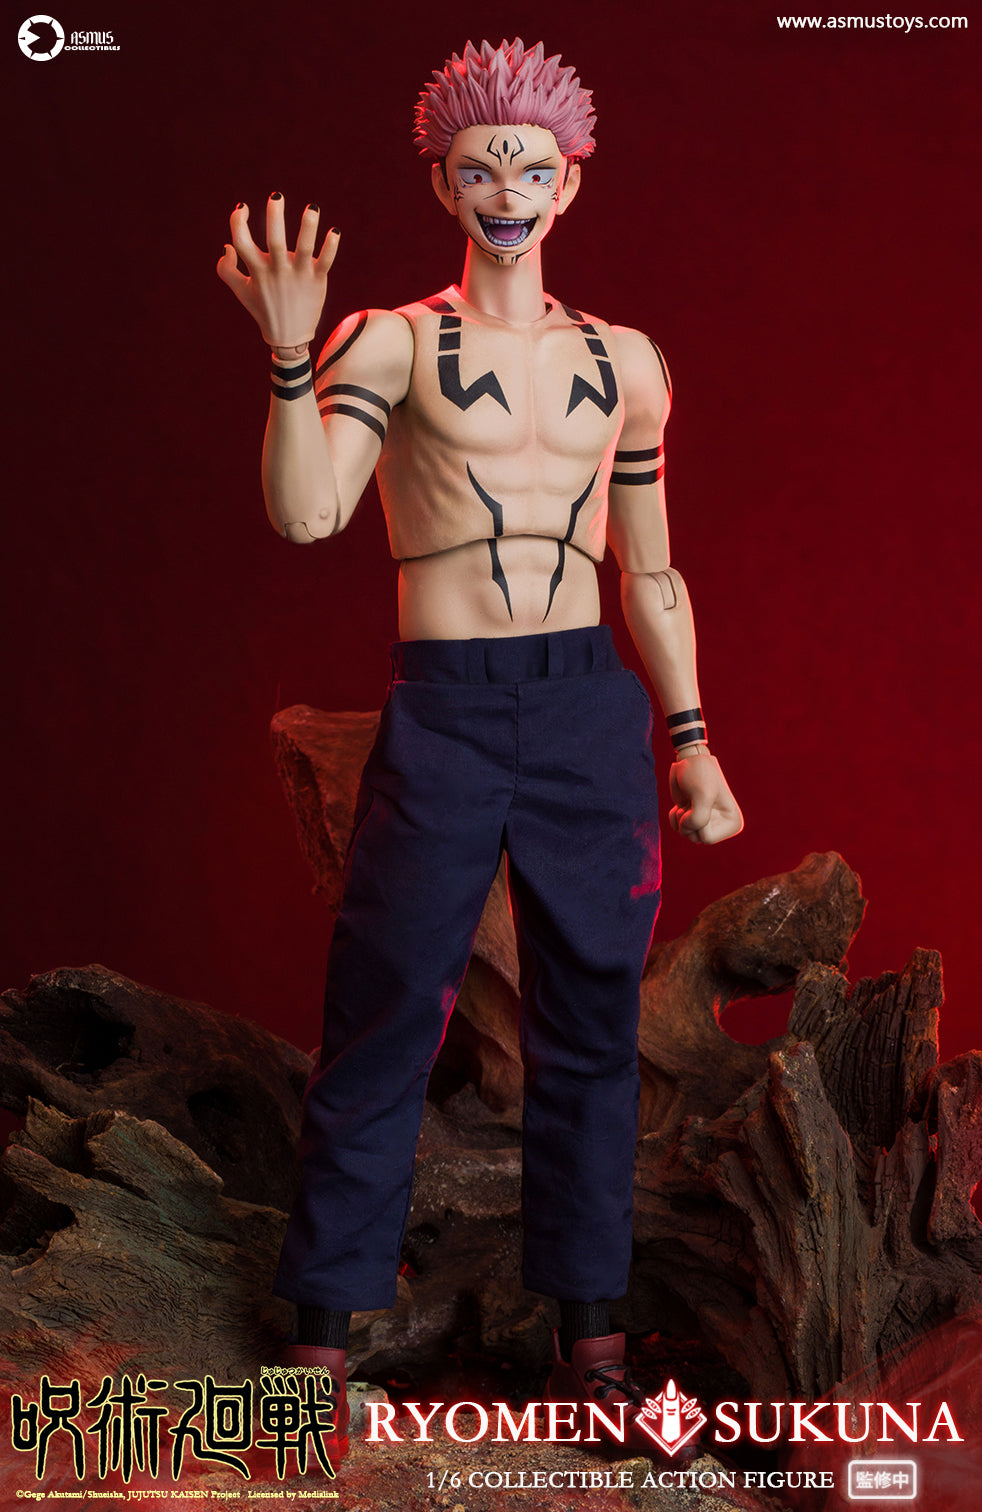 Anime Heroes Jujutsu Kaisen Ryomen Sukuna Action Figure - Collectible  Naruto Series with Interchangeable Accessories and Articulation